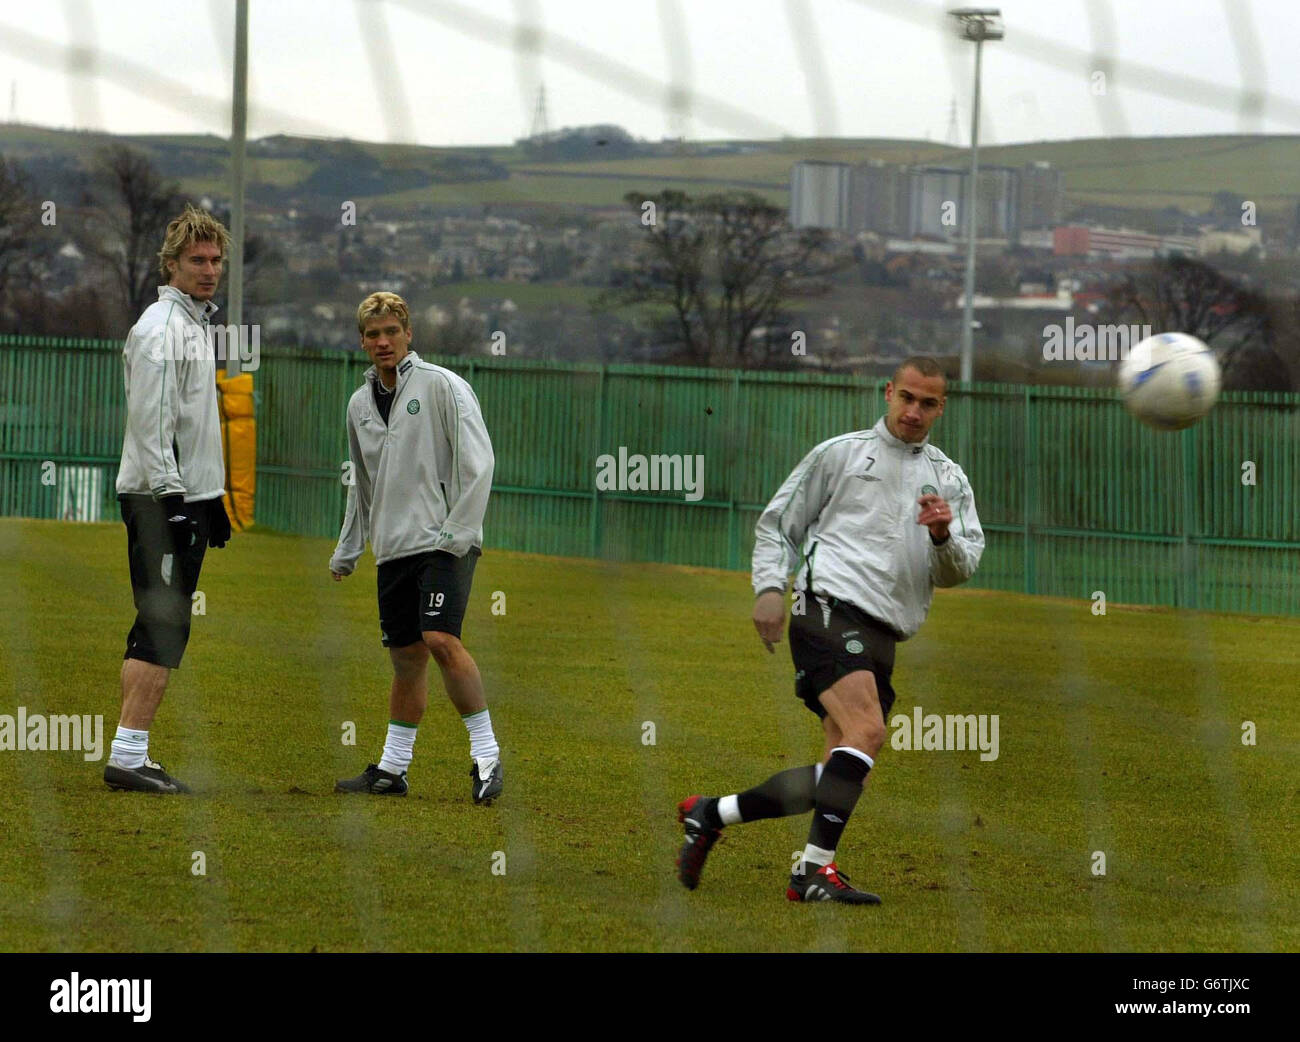 Henrik Larsson taking a shot at goal with Stilian Petrov (middle) and Stanislav Varga during training at Celtics Social Club ground before the game against Barcelona in the fourth-round first leg Uefa Cup tie at Parkhead football ground in Glasgow. Stock Photo